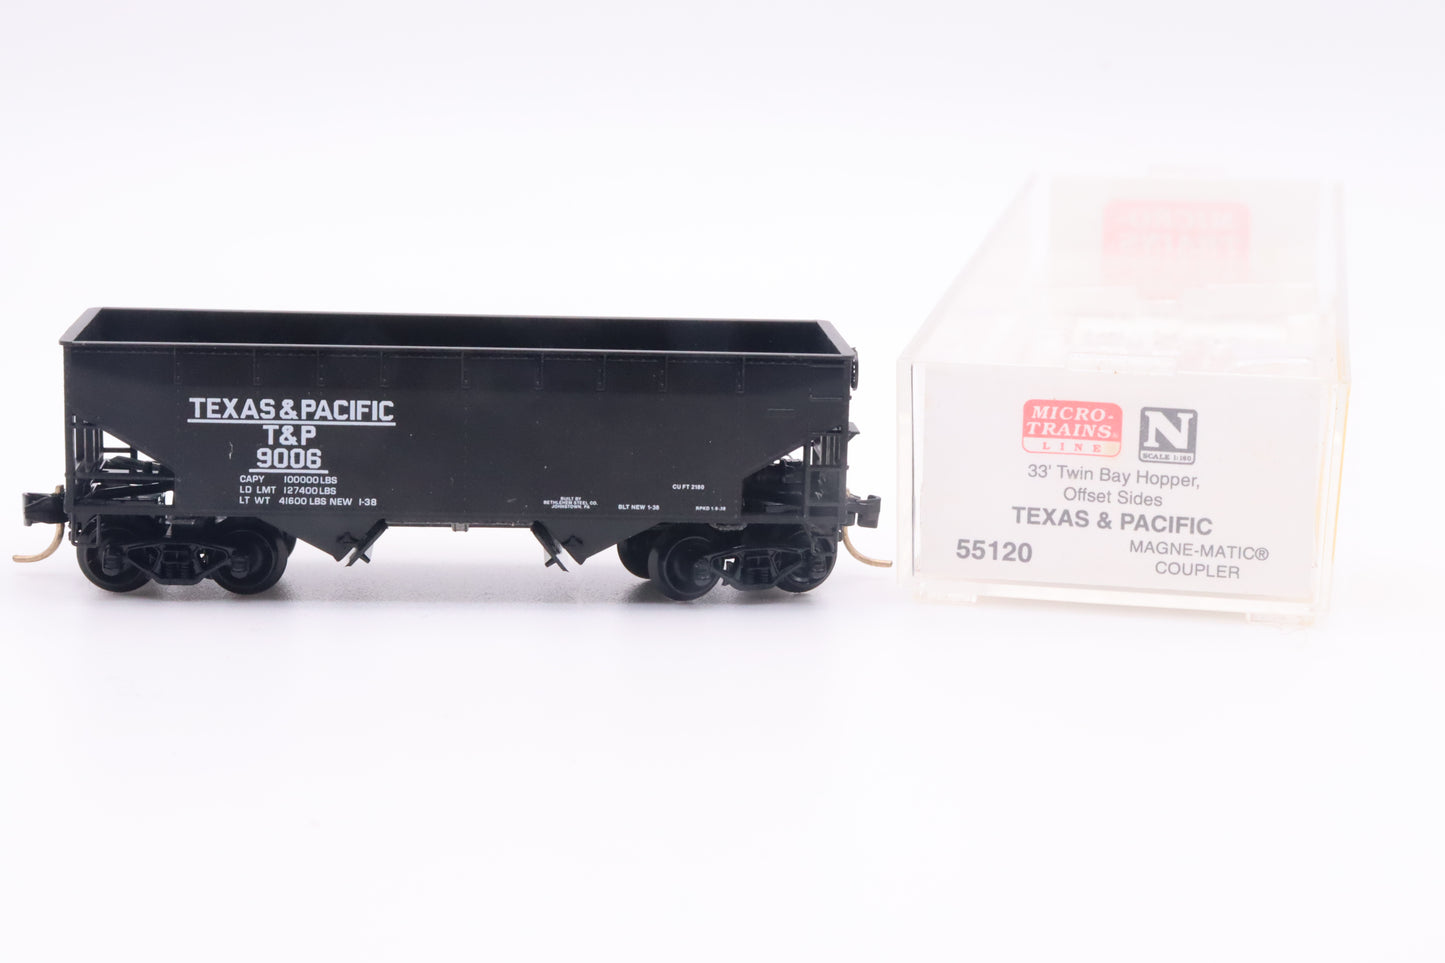 MTL-55120 - 33' Twin Bay Hopper, Offset Sides - Texas & Pacific - T&P-9006